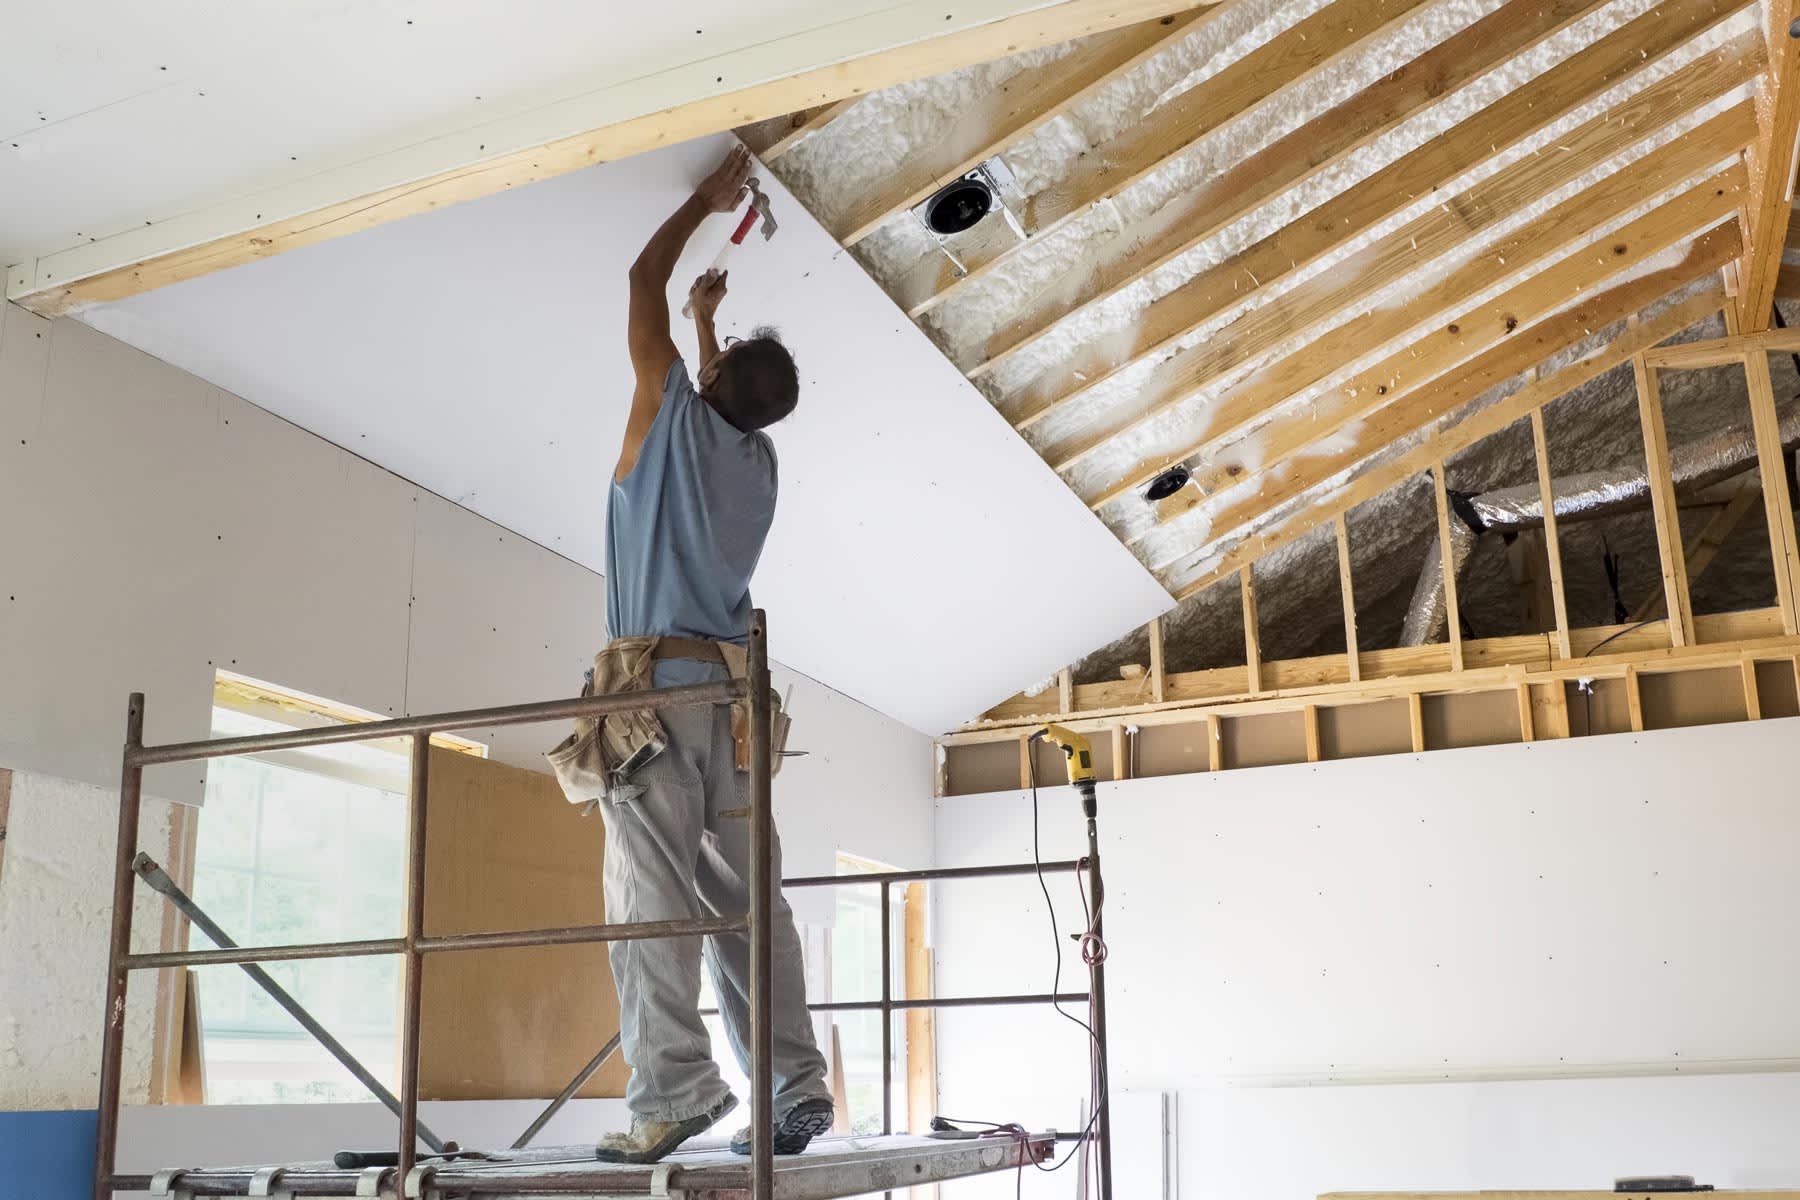 How much does drywall installation cost?